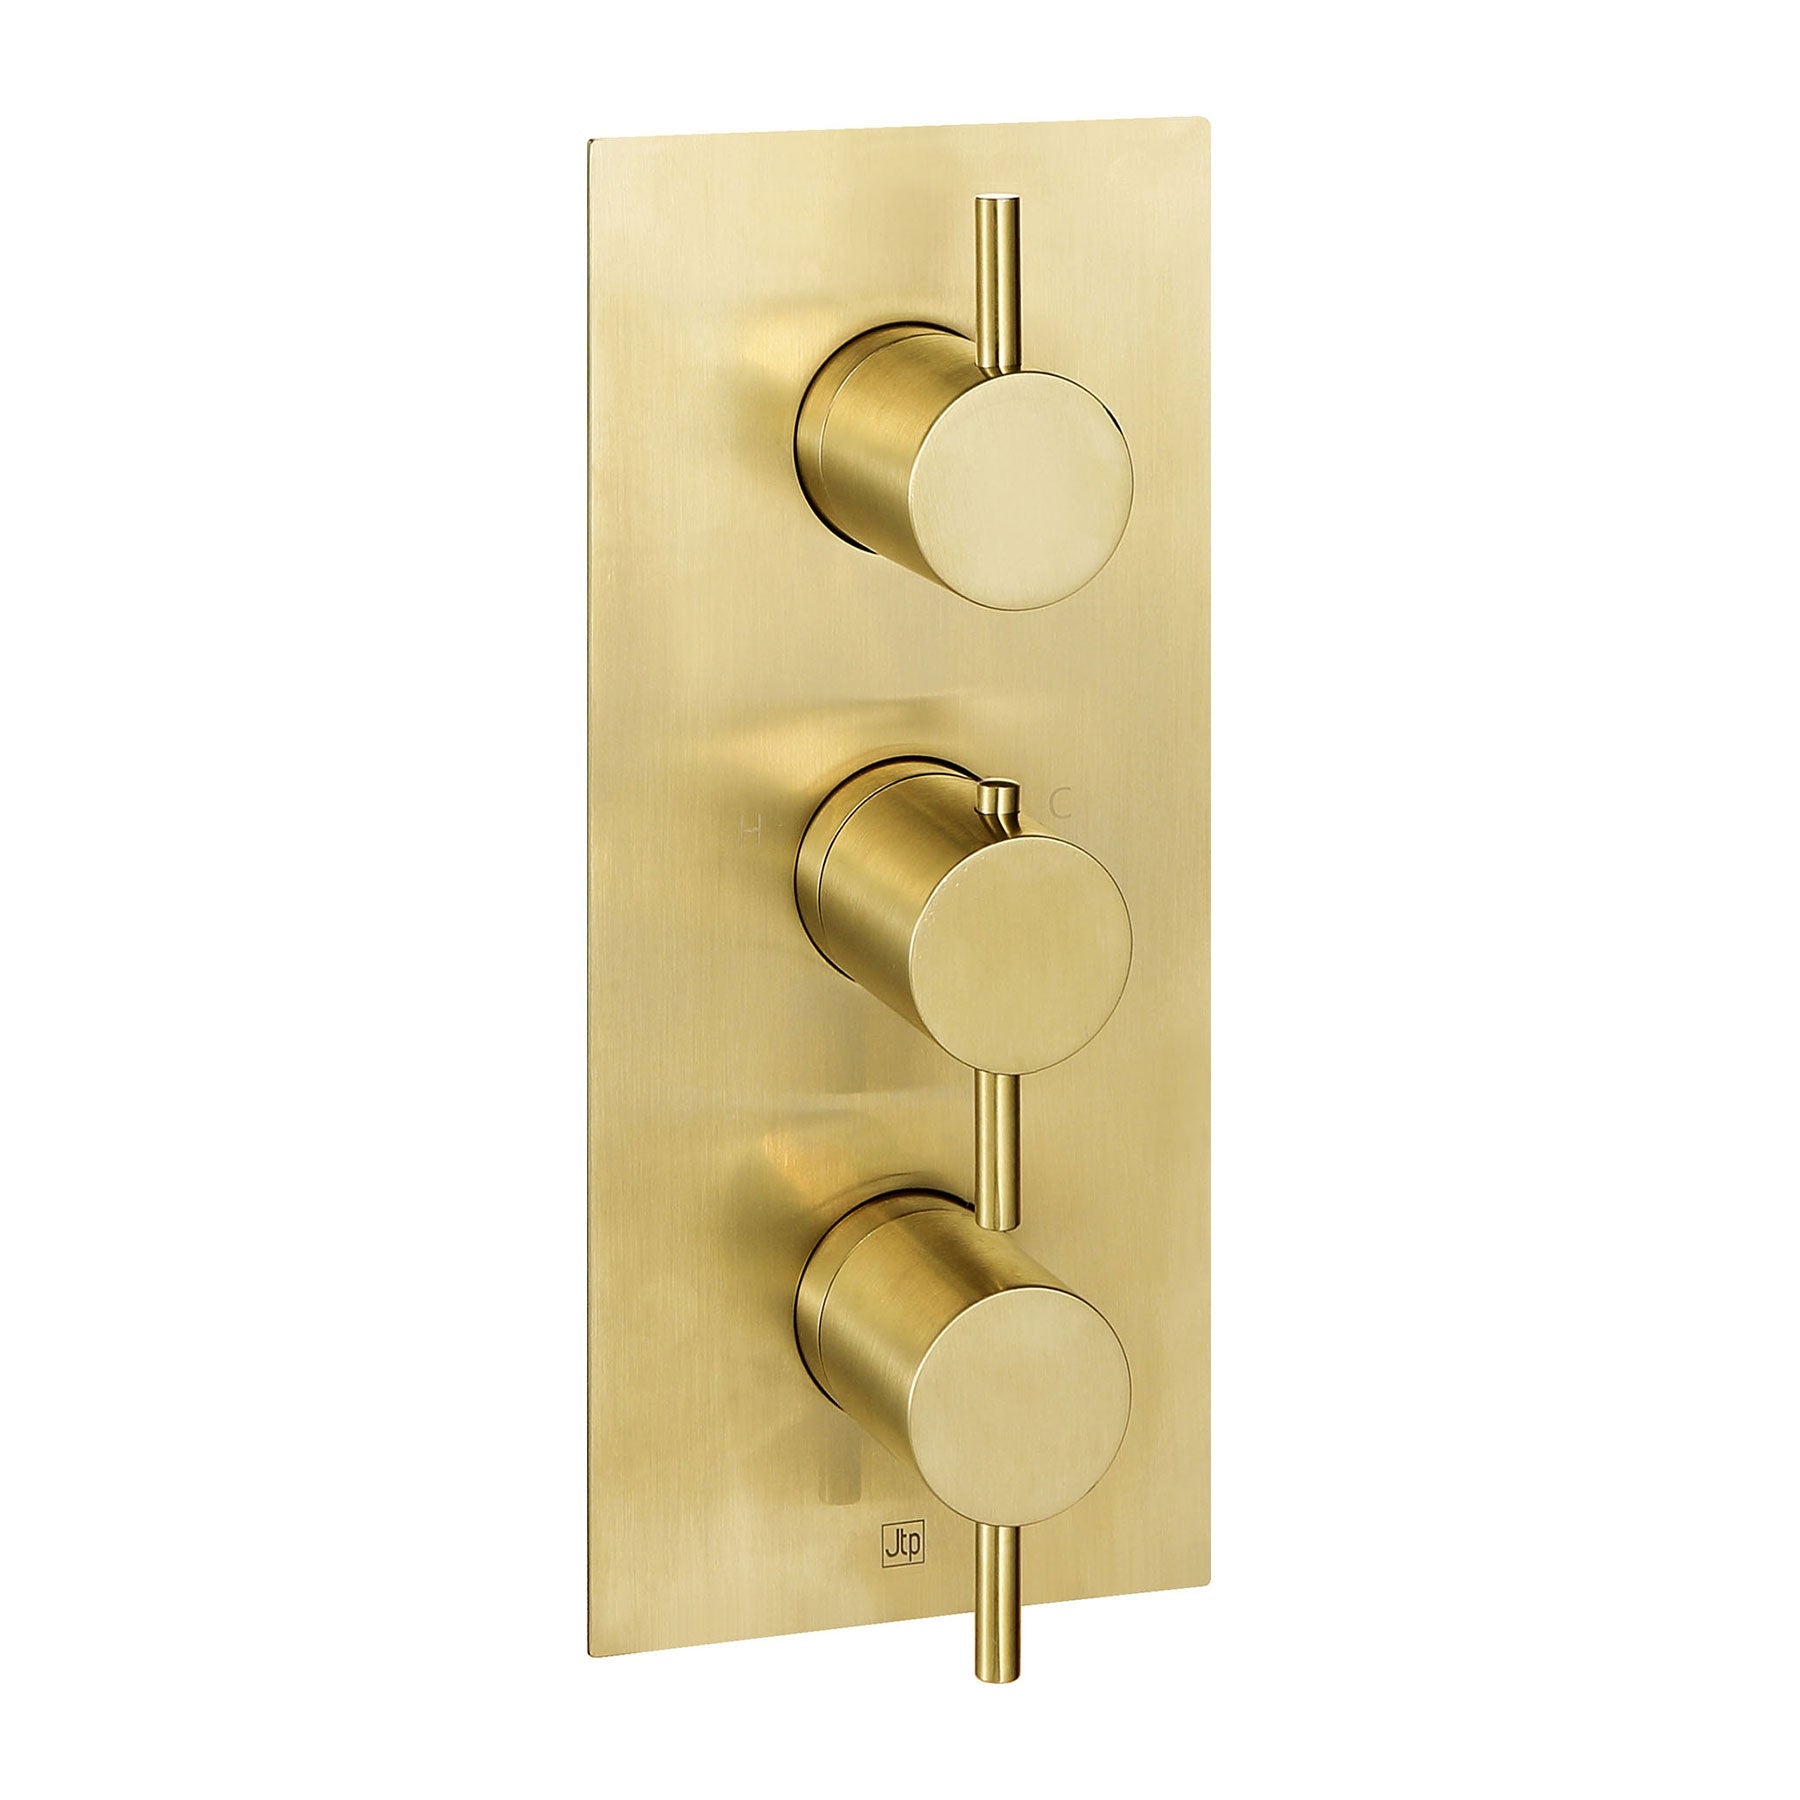 VOS 2 Outlet Concealed Thermostatic Bath & Shower Valve - Brushed Brass Finish[23690ABBR]